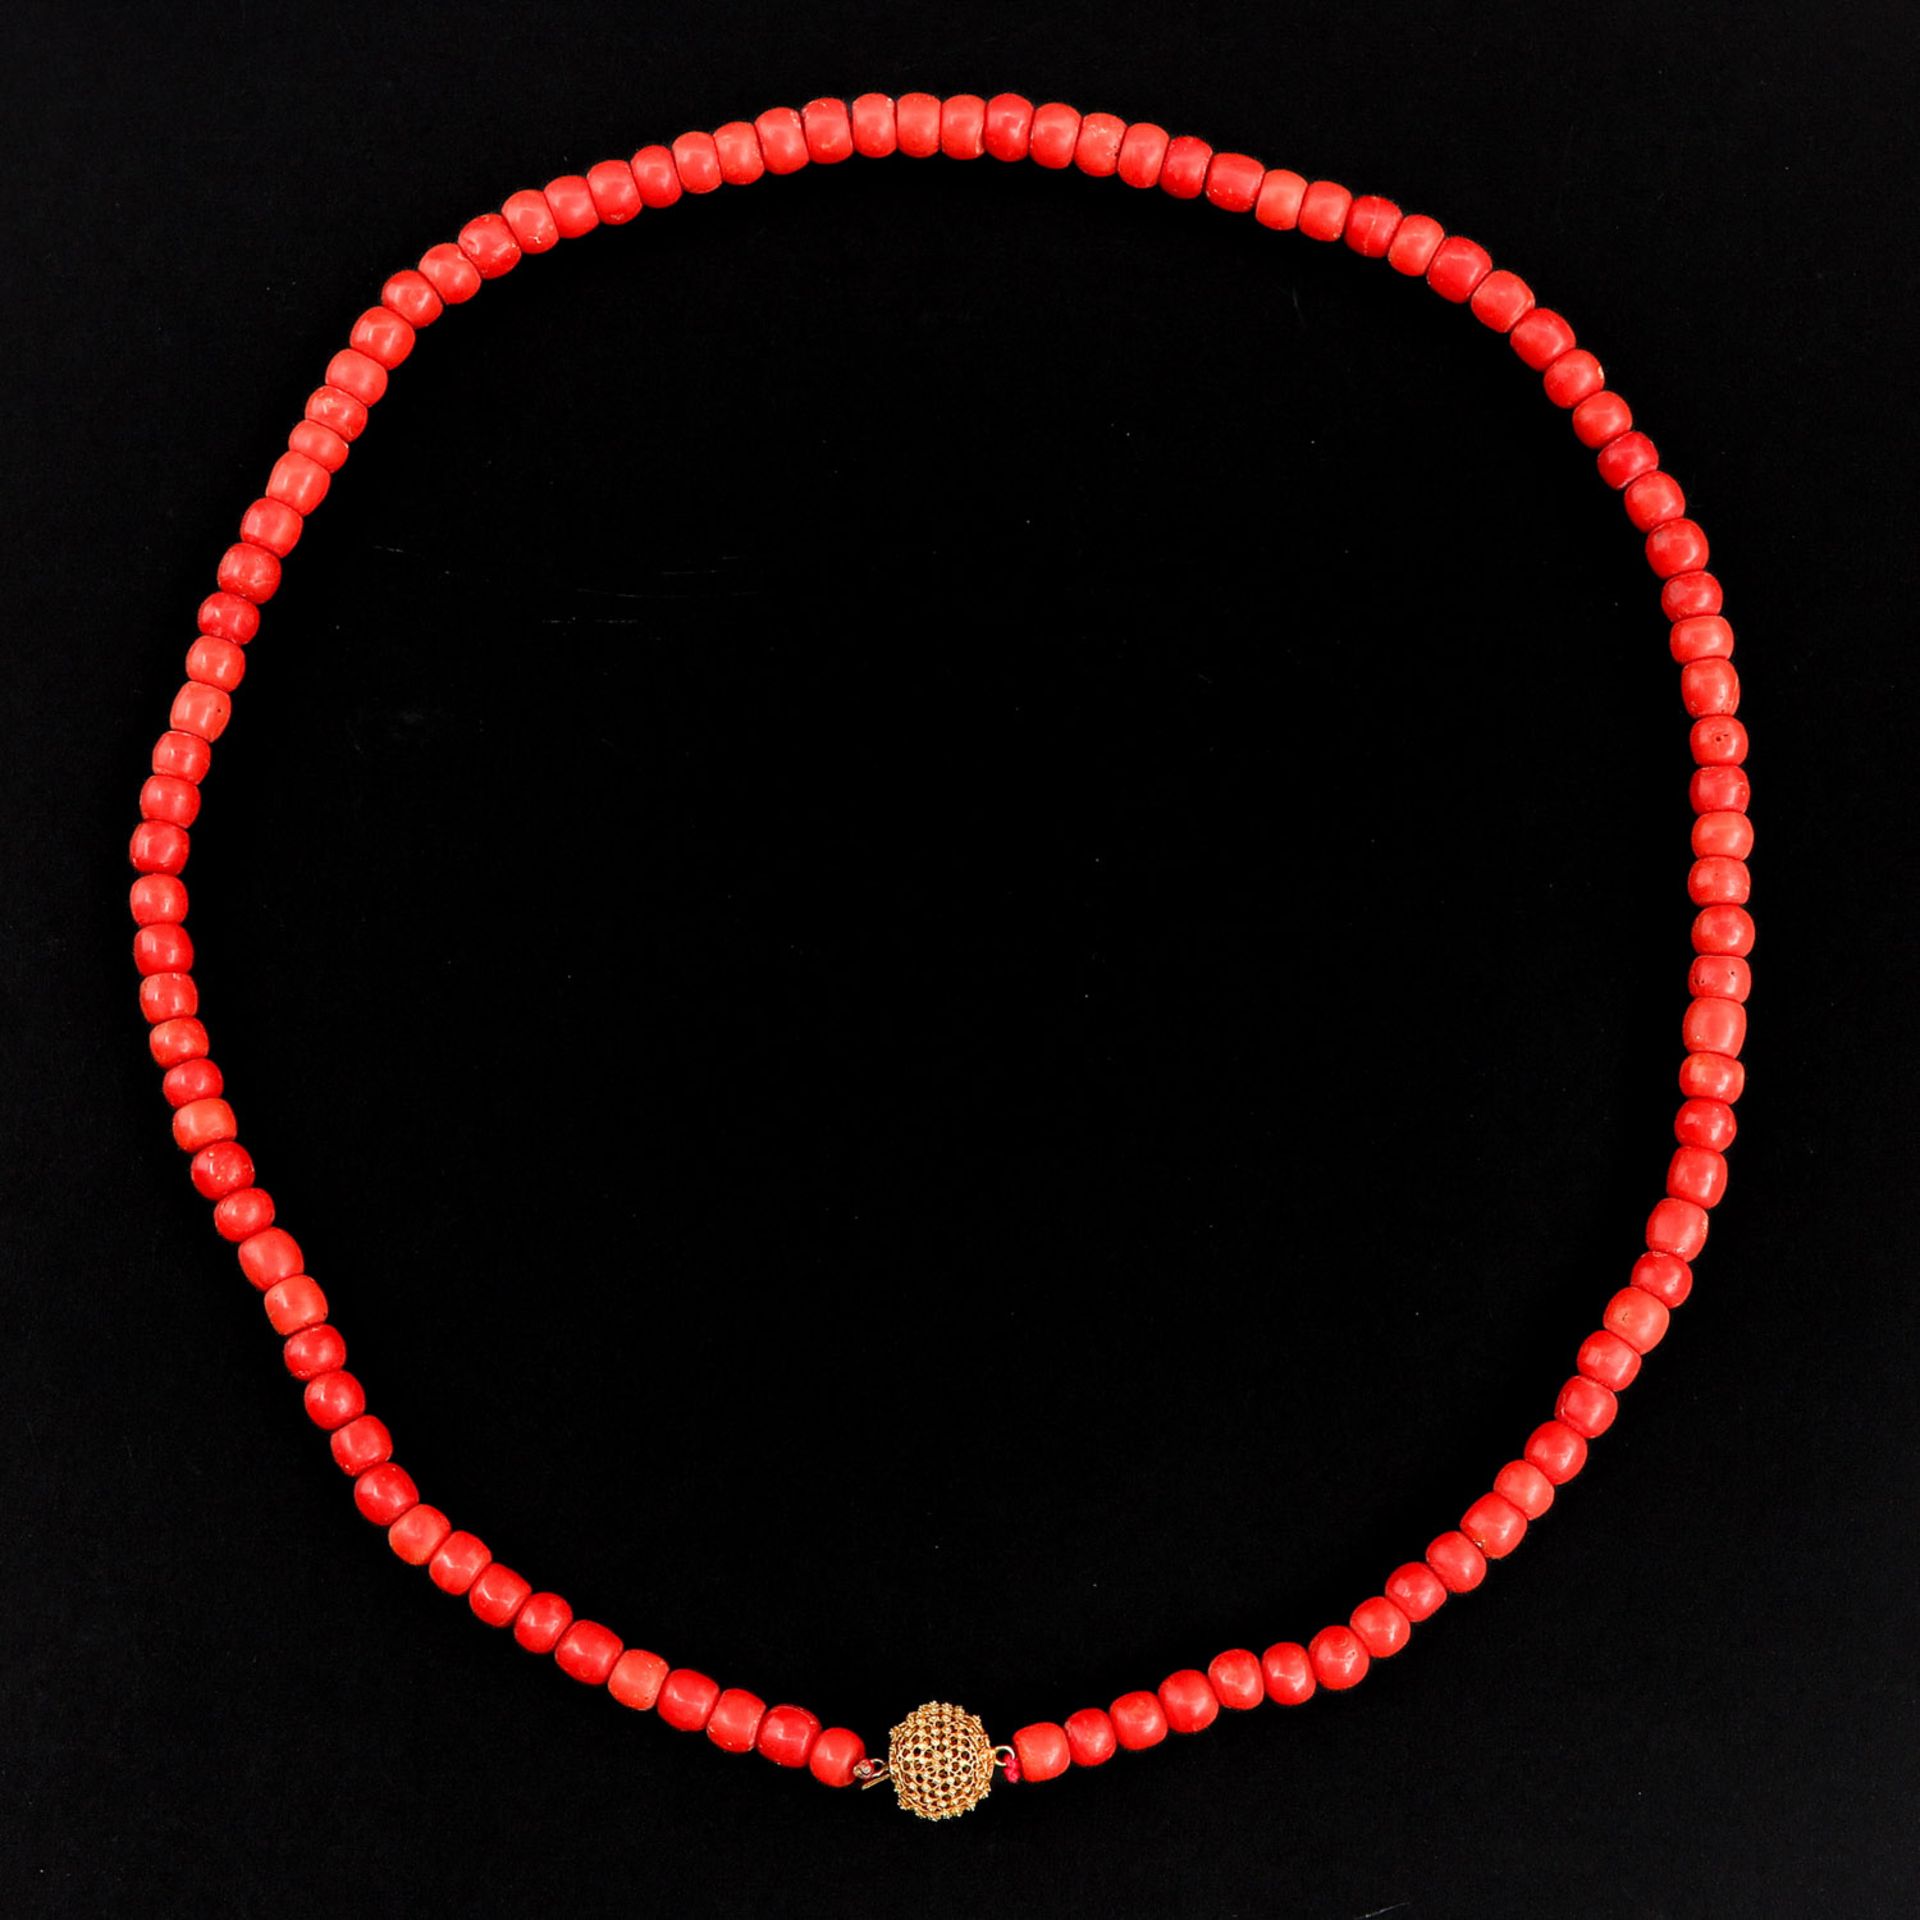 A Single Strand Red Coral Necklace - Image 4 of 7